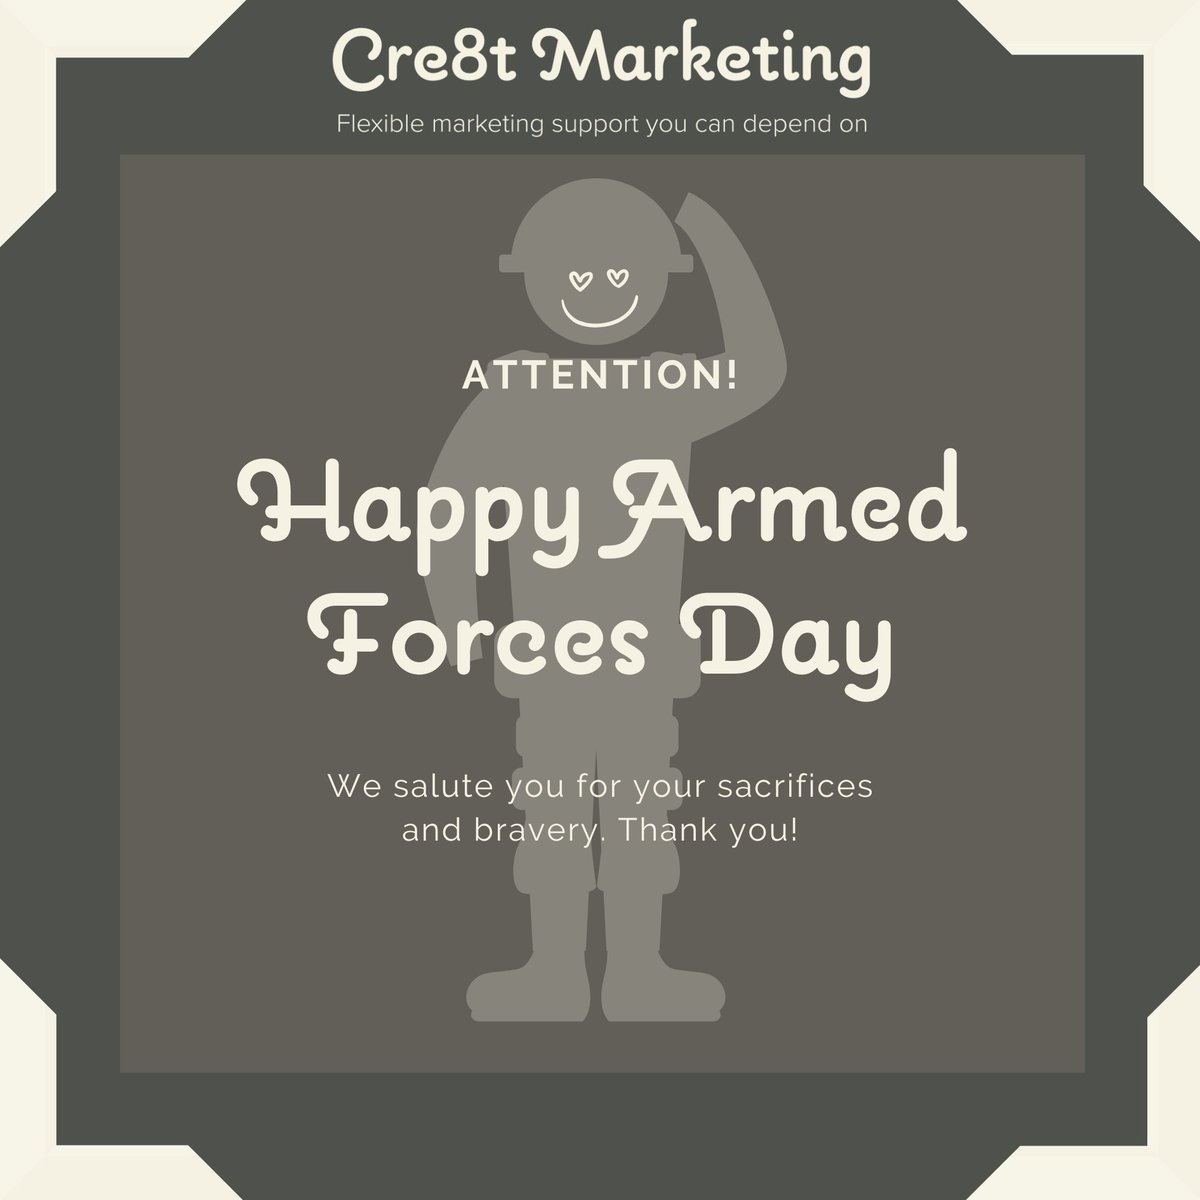 Super proud to support my army veteran clients! 💚

Join me in honouring our heroes on Armed Forces Day – to those who have served or are still serving – we salute you.🫡

#ArmedForcesDay #SupportOurTroops #SaluteToService #HeroesAmongUs #GratefulNation #Cre8tMarketing